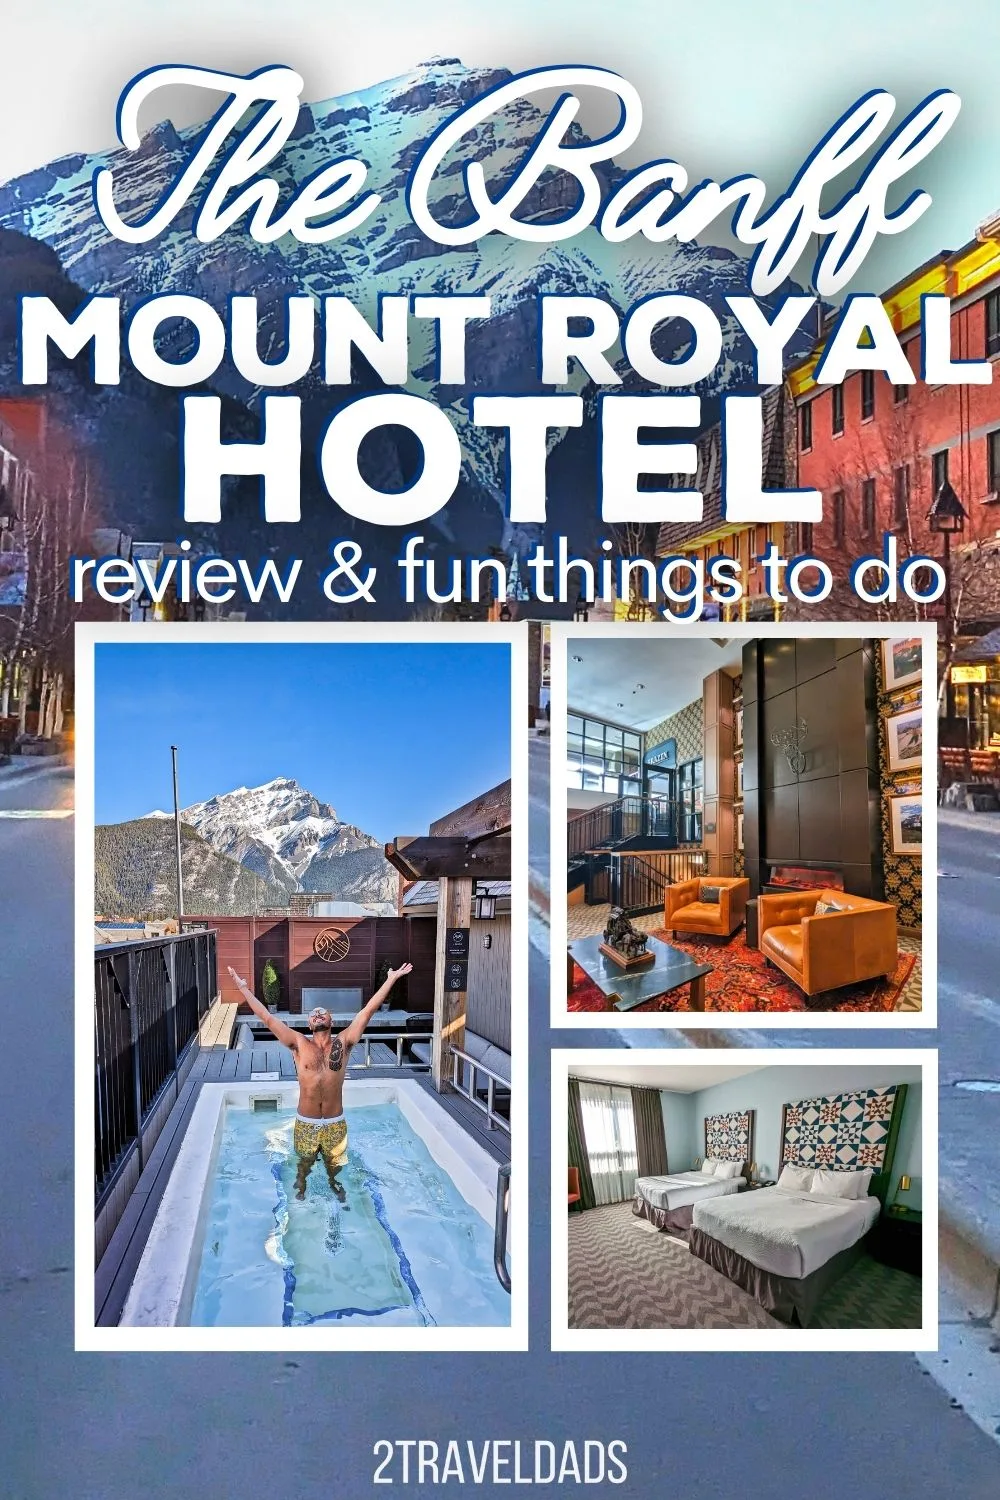 If you need a nice place to stay in downtown Banff, the Mount Royal Hotel is THE place. With rooftop hot tubs, a lounge for guests and spacious rooms it's a fantastic home base for exploring Banff National Park.